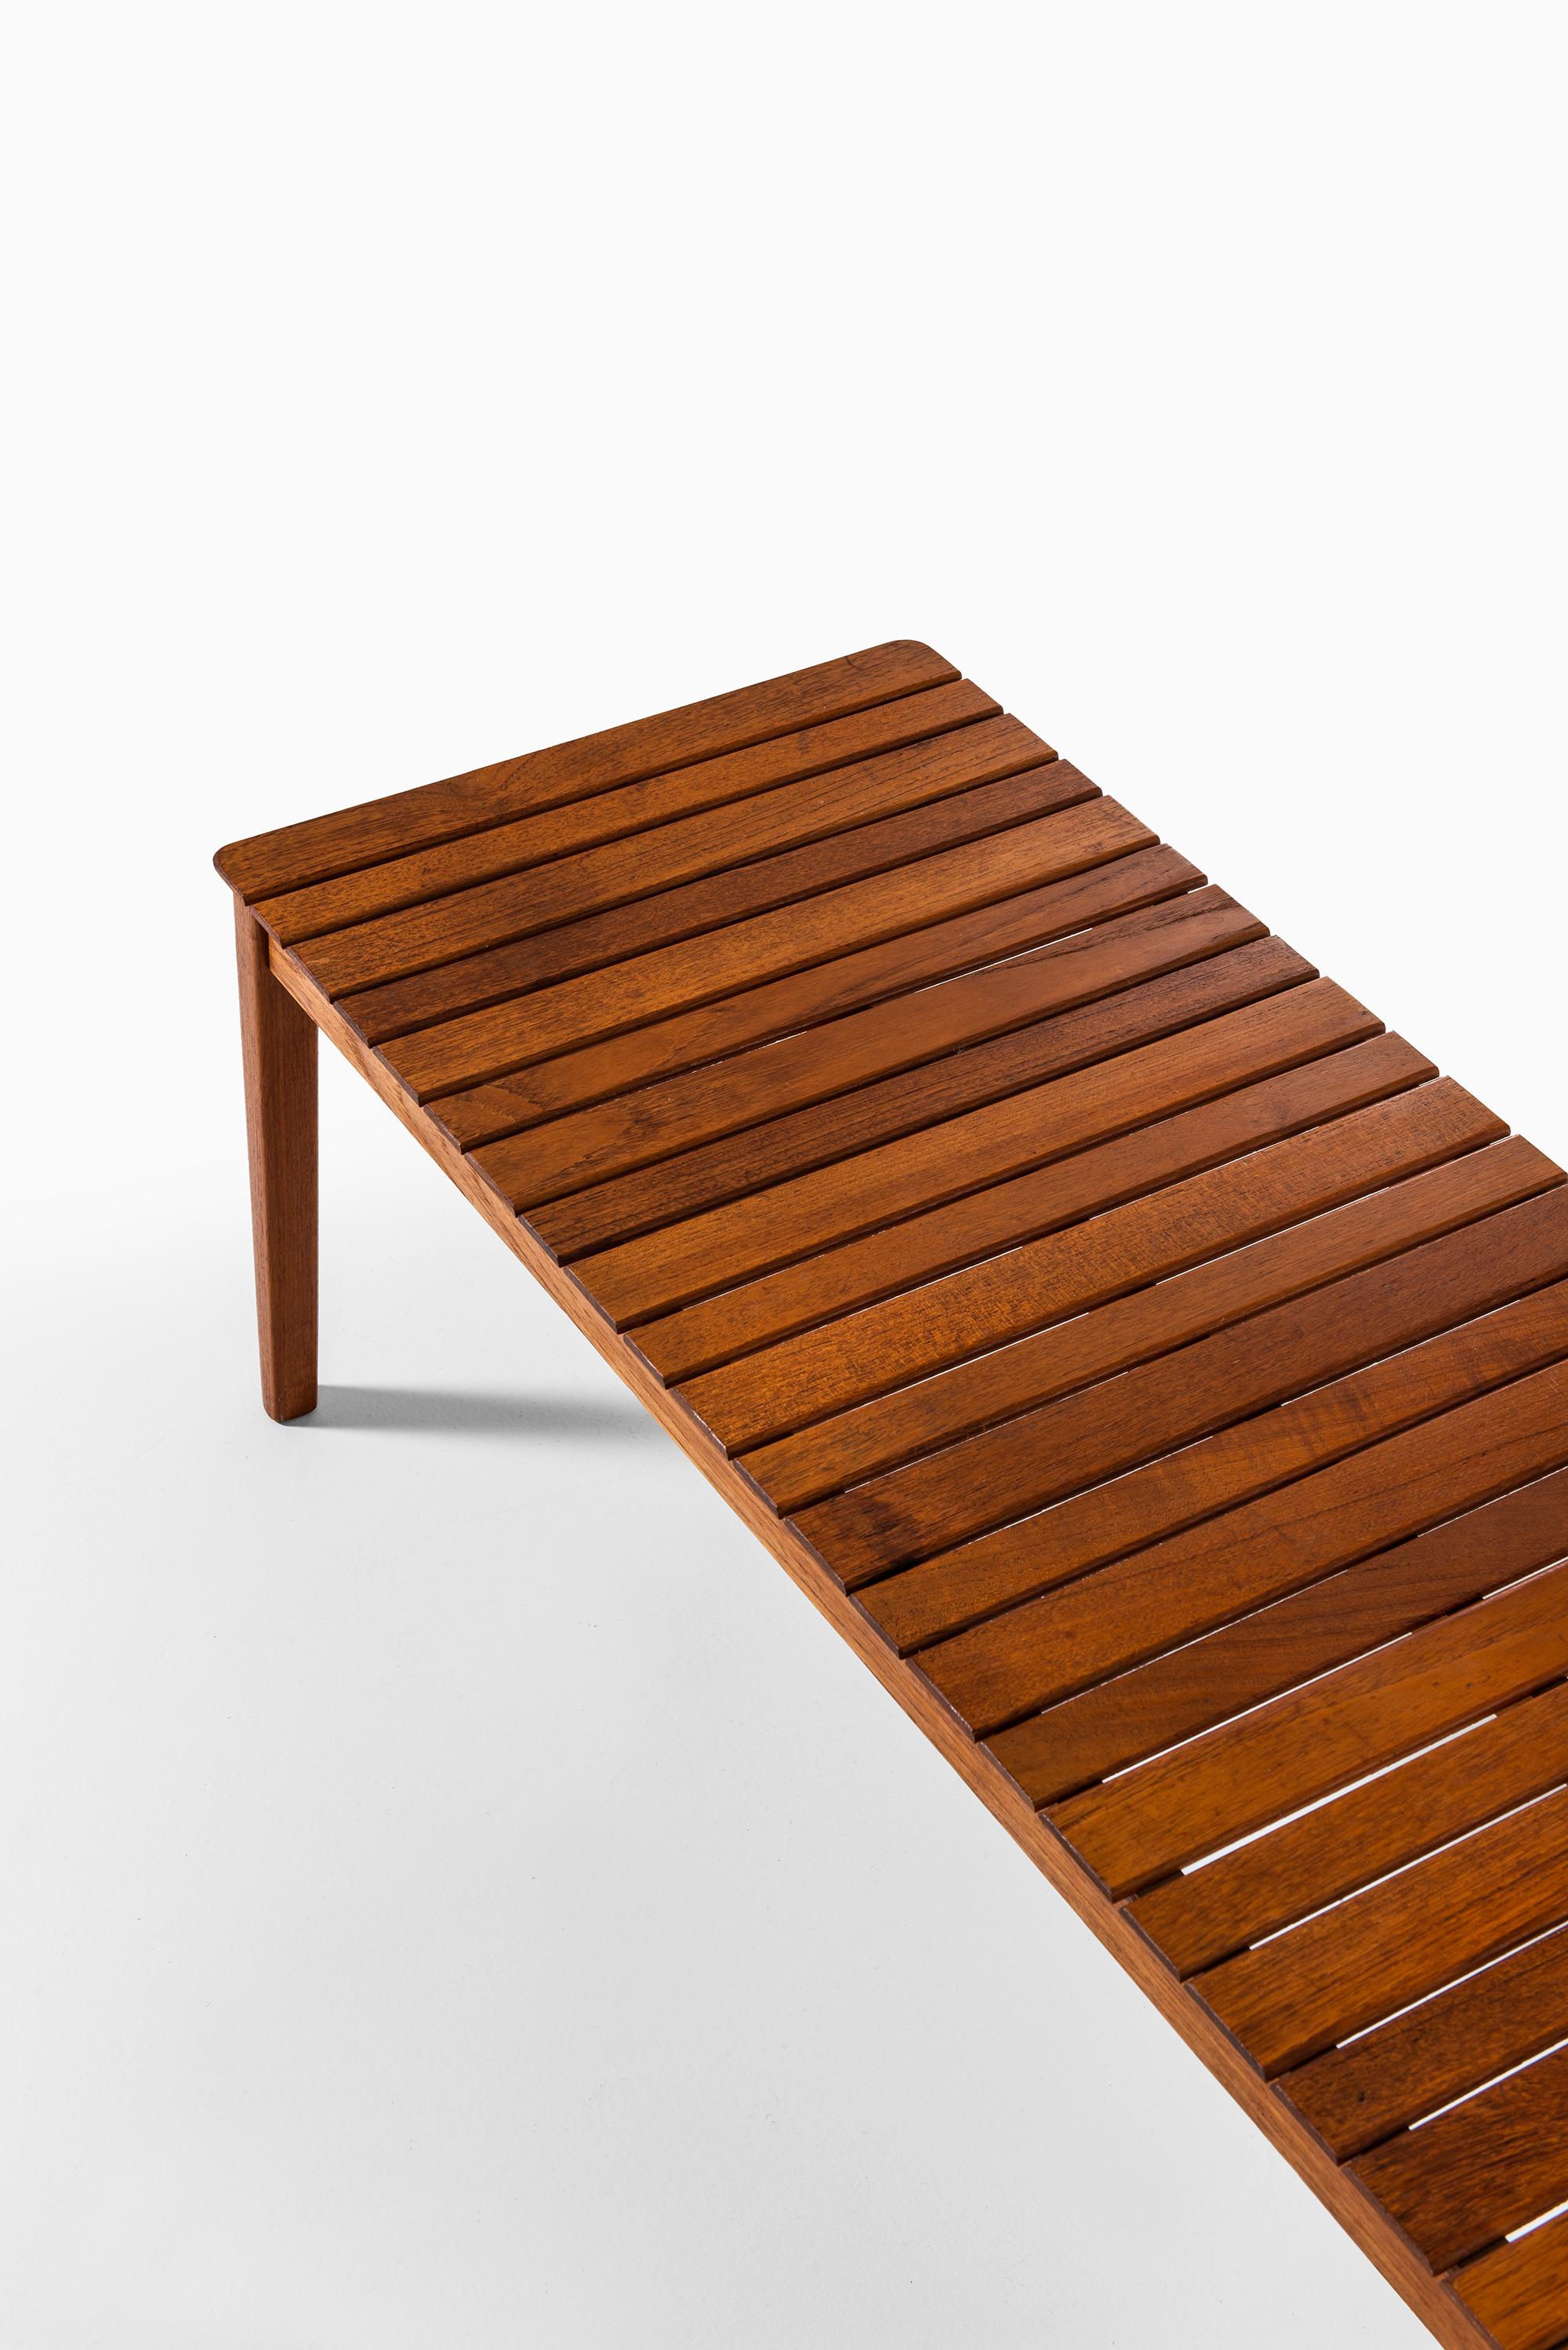 Scandinavian Modern Side Table or Bench in Solid Teak Produced by Alberts in Sweden